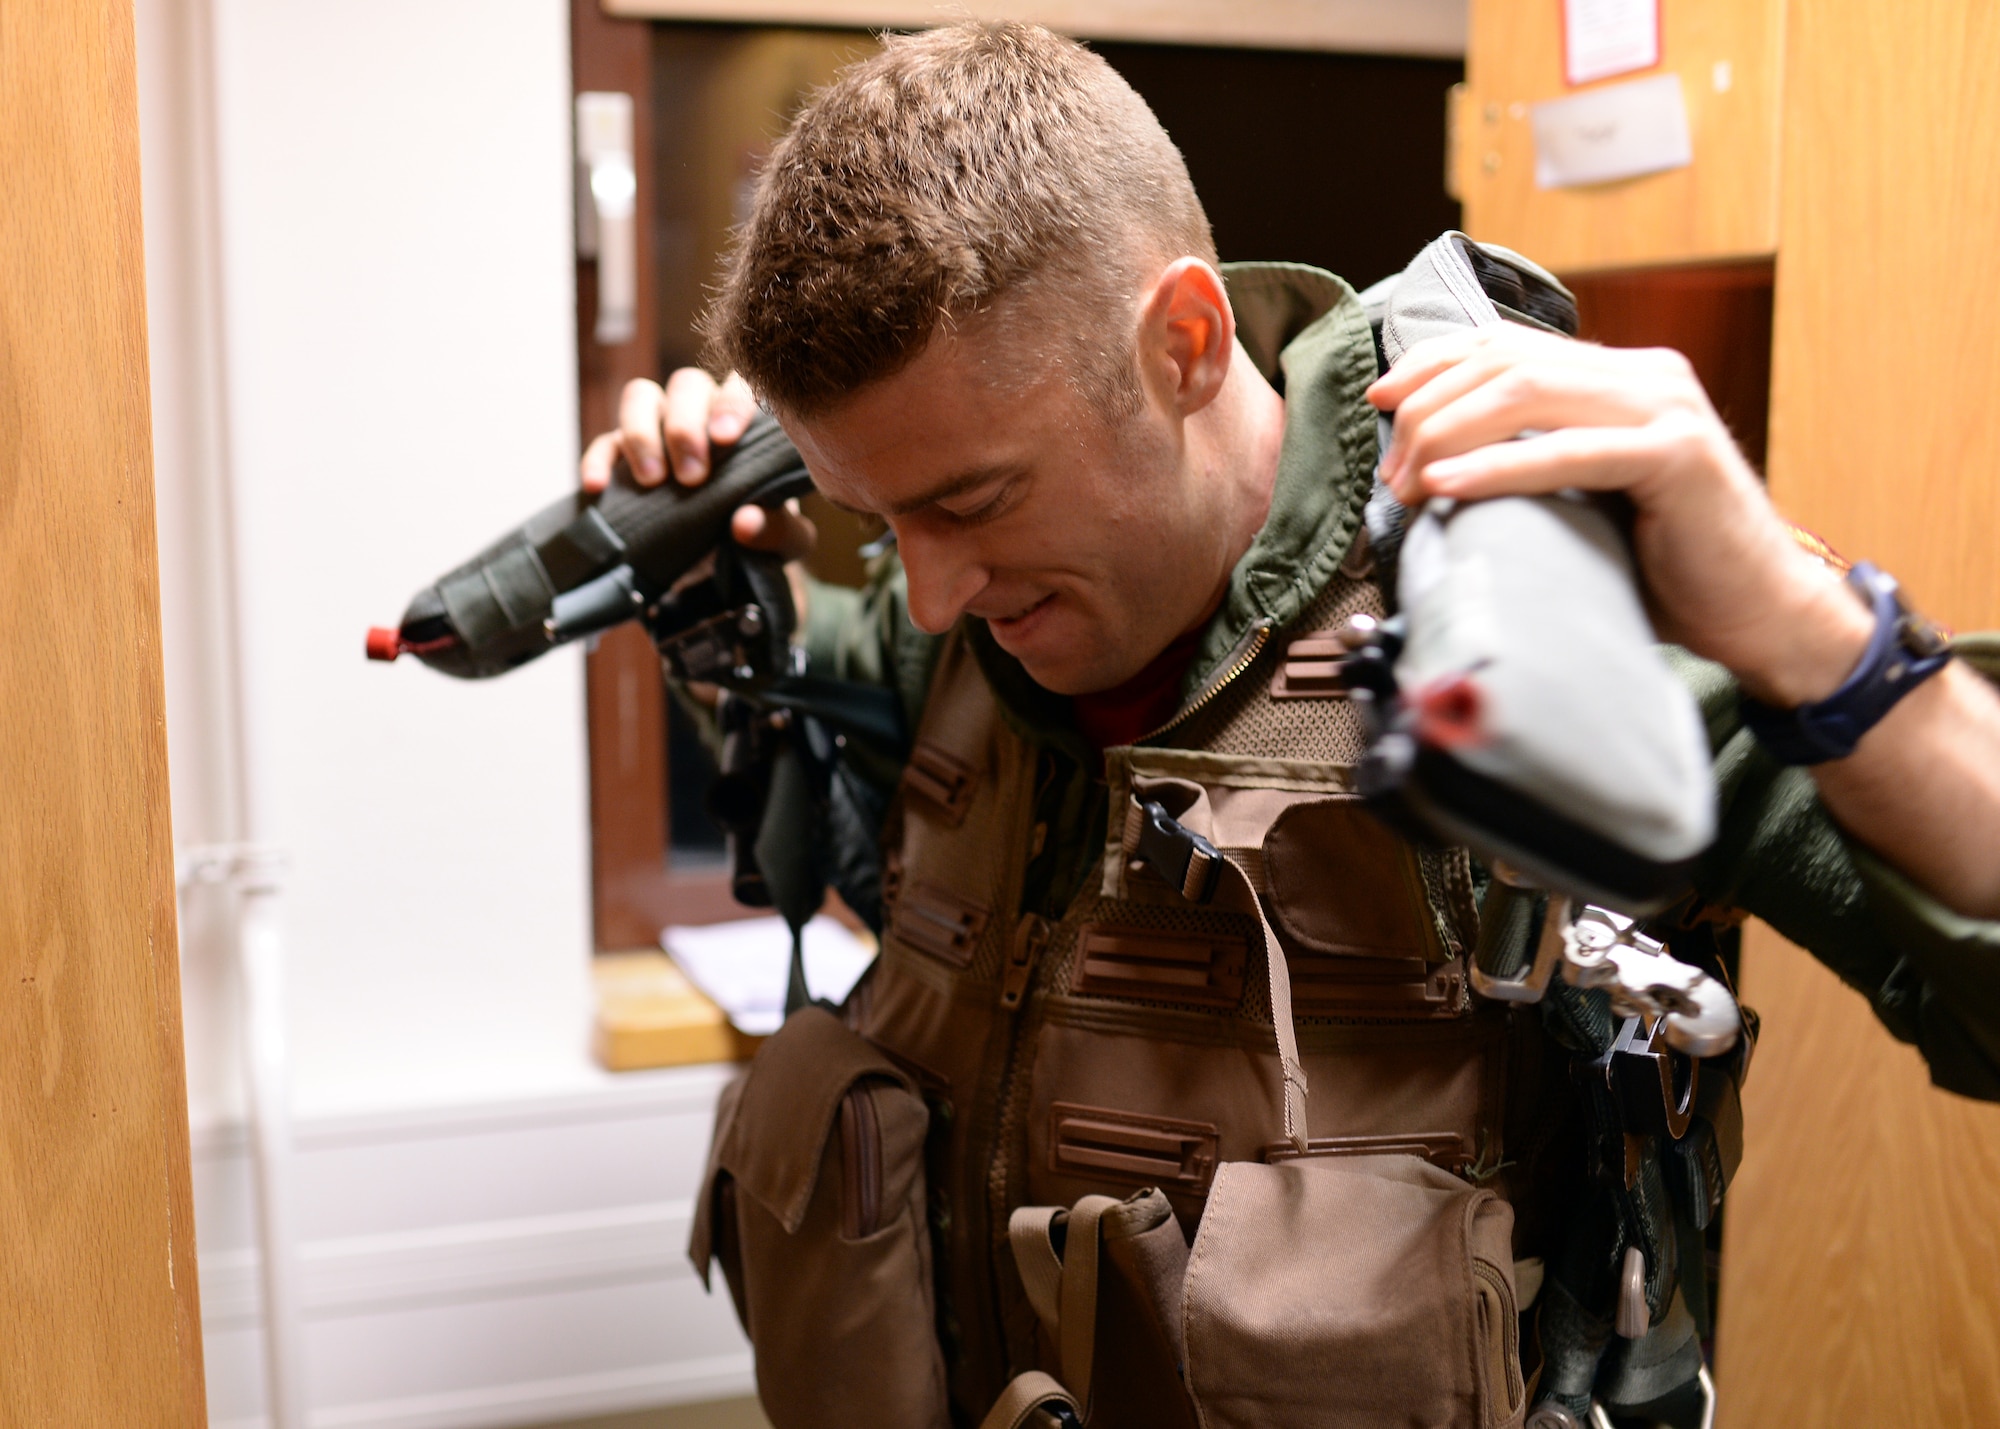 A U.S. Air Force F-16 Fighting Falcon fighter aircraft pilot from the 480th Fighter Squadron at Spangdahlem Air Base, Germany, dons his flight gear Aug. 8, 2014, prior to departing for a bilateral training event to Souda Bay, Greece, Aug. 11-23. Nearly 20 aircraft are participating from Spangdahlem to strengthen the air-to-air compatibility between the U.S. and Greece, with the hopes that such training will lead to regional peace and stability throughout Europe. (U.S. Air Force photo by Staff Sgt. Daryl Knee/Released)